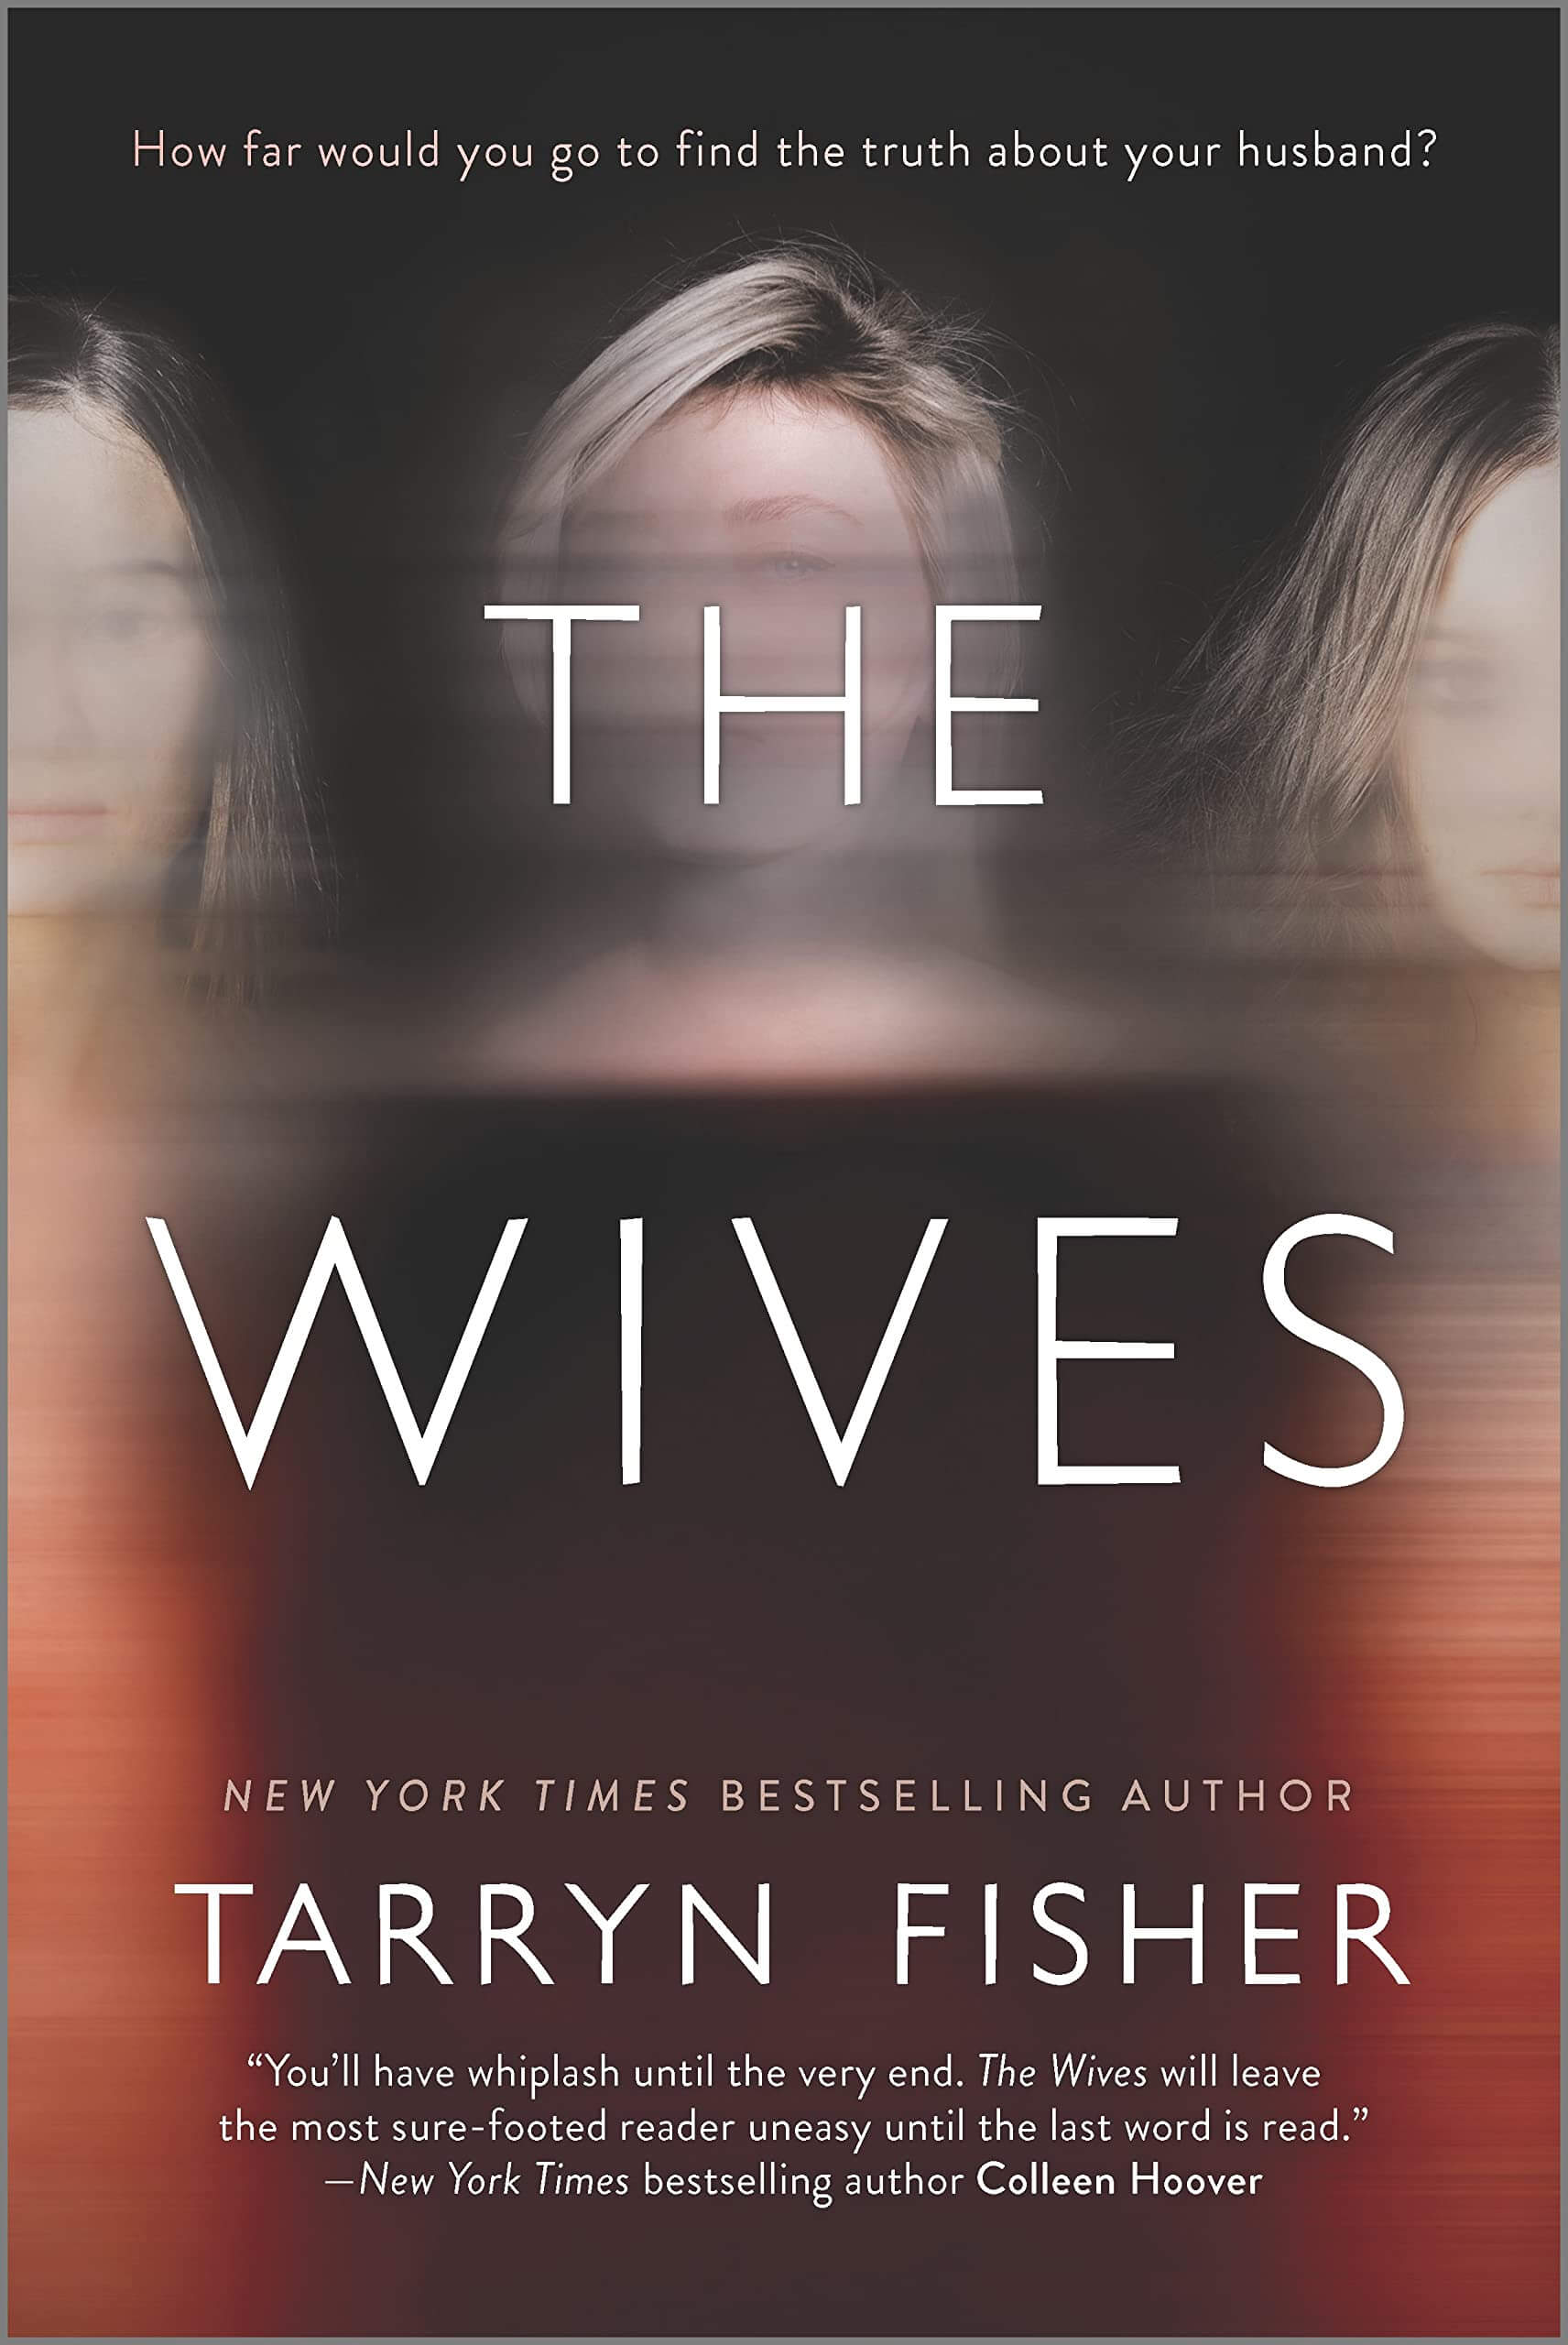 Cover of The Wives by Tarryn Fisher